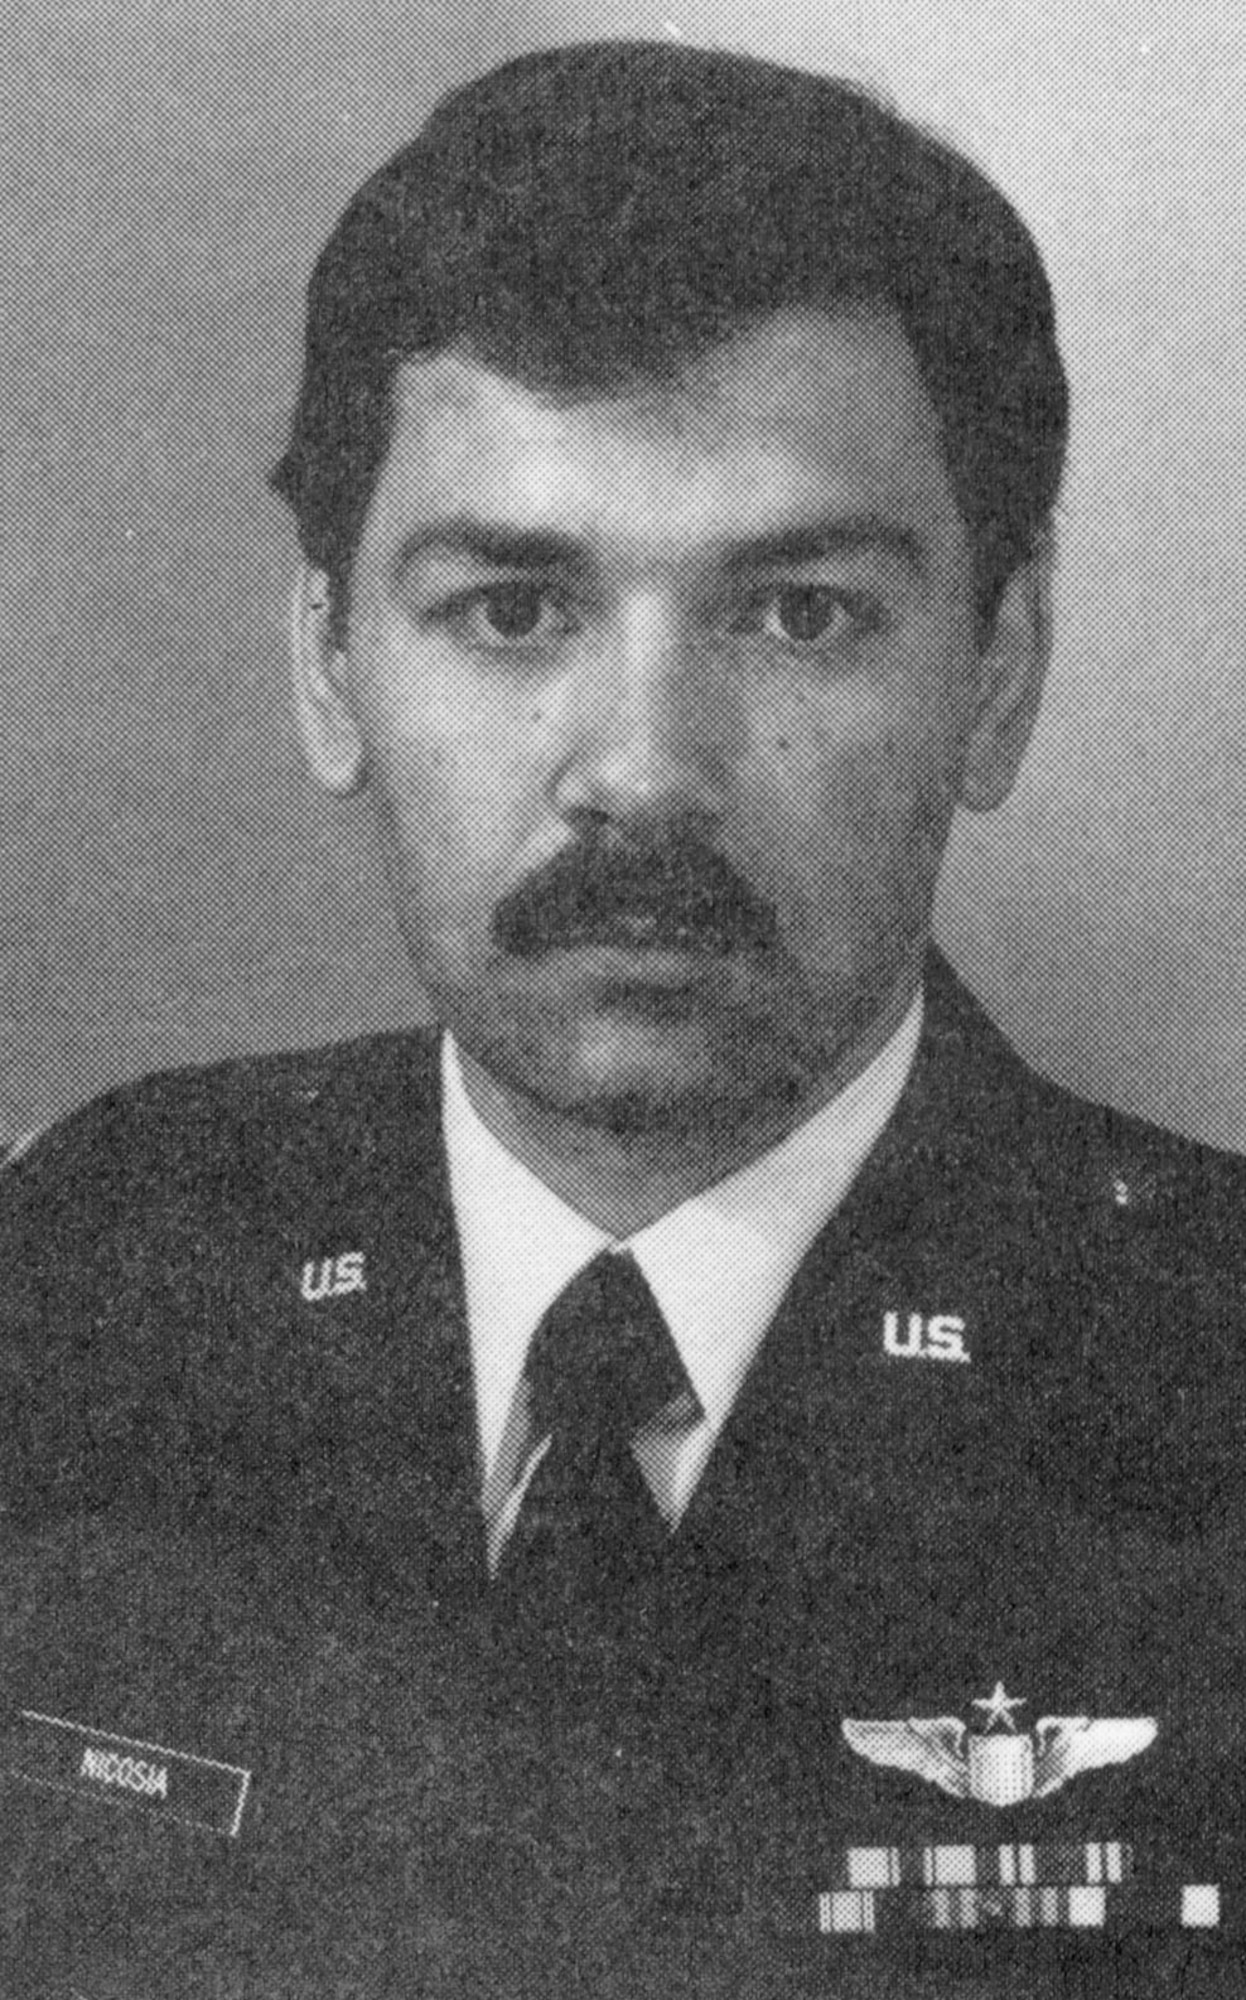 Capt. Robert J. Nicosia was born in Detroit, Mich., on Nov. 12, 1948. He entered the Air Force as a 2nd Lt. in 1973 and served as a KC-135 pilot, co-pilot, and instructor pilot until 1978 at Rickenbacker AFB, Ohio.